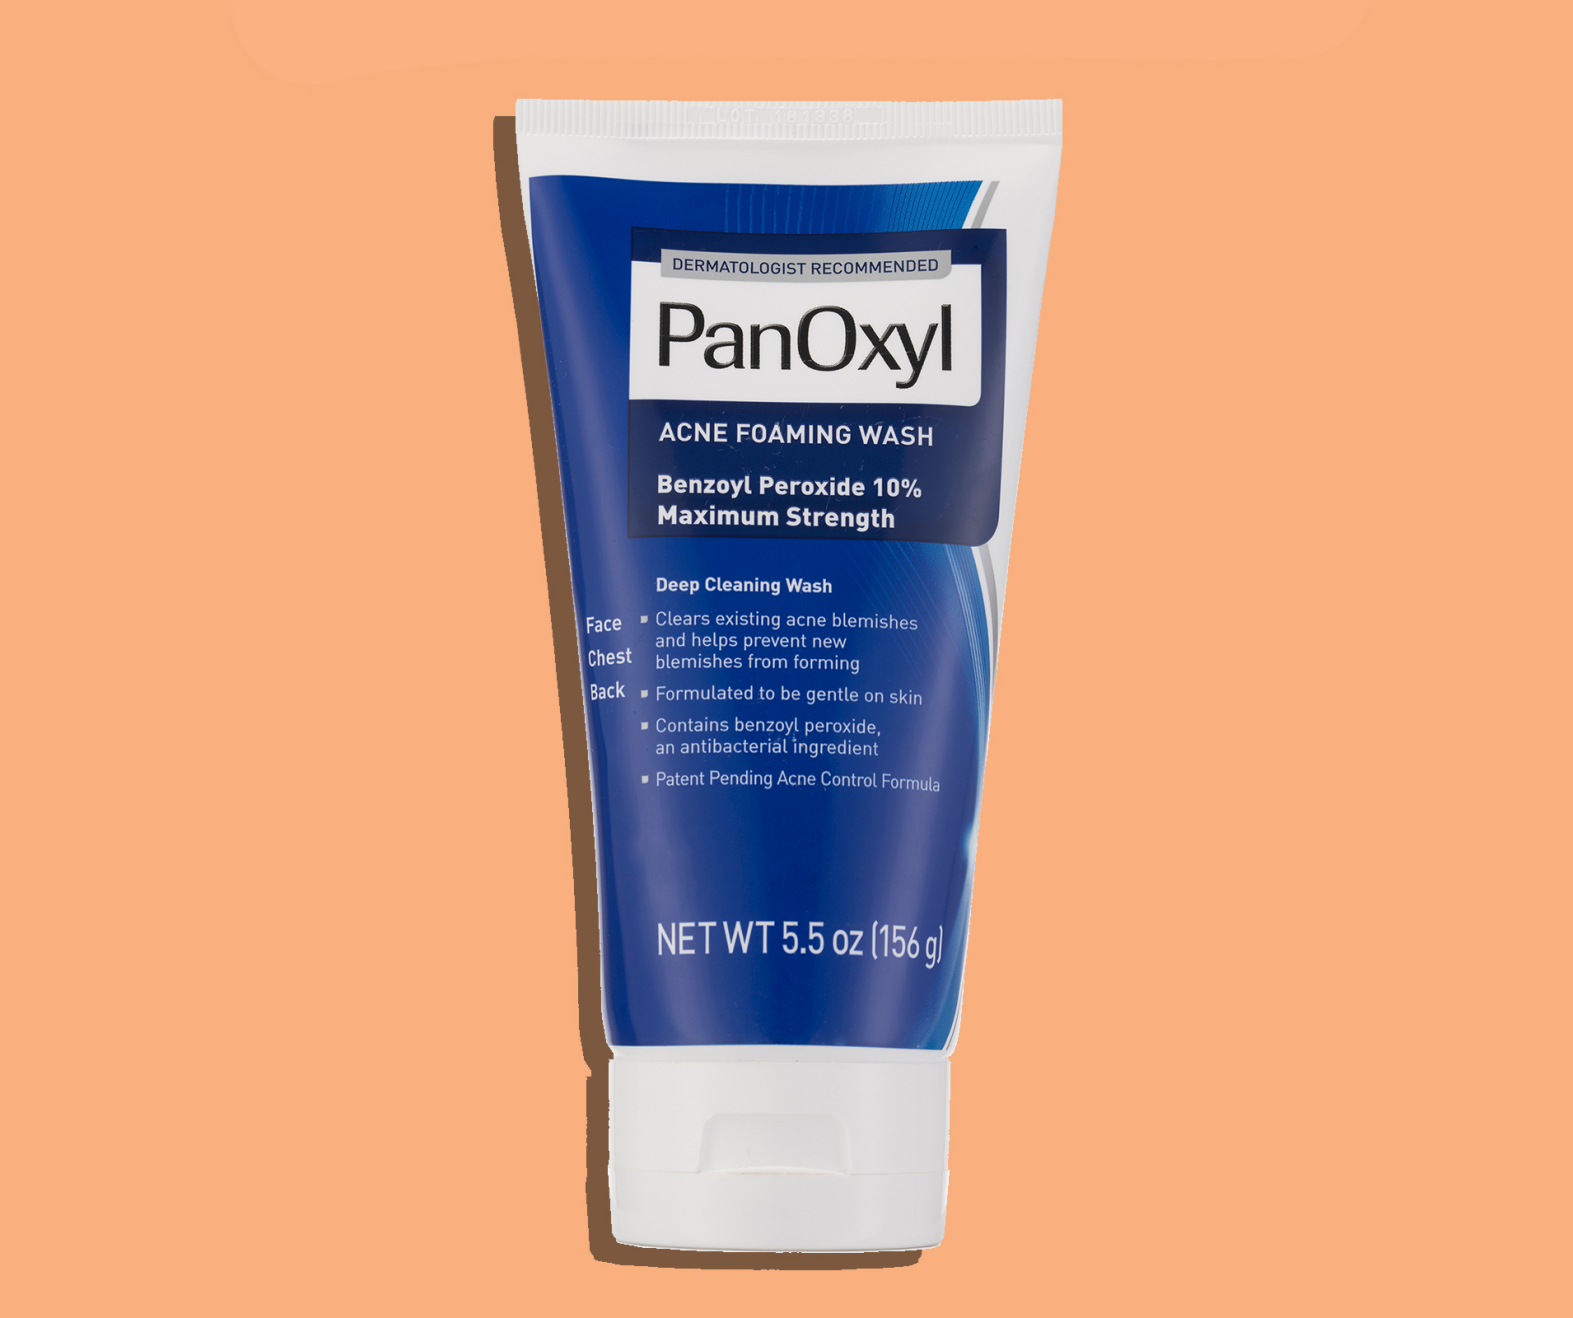 Best Acne Face Washes - PanOxyl